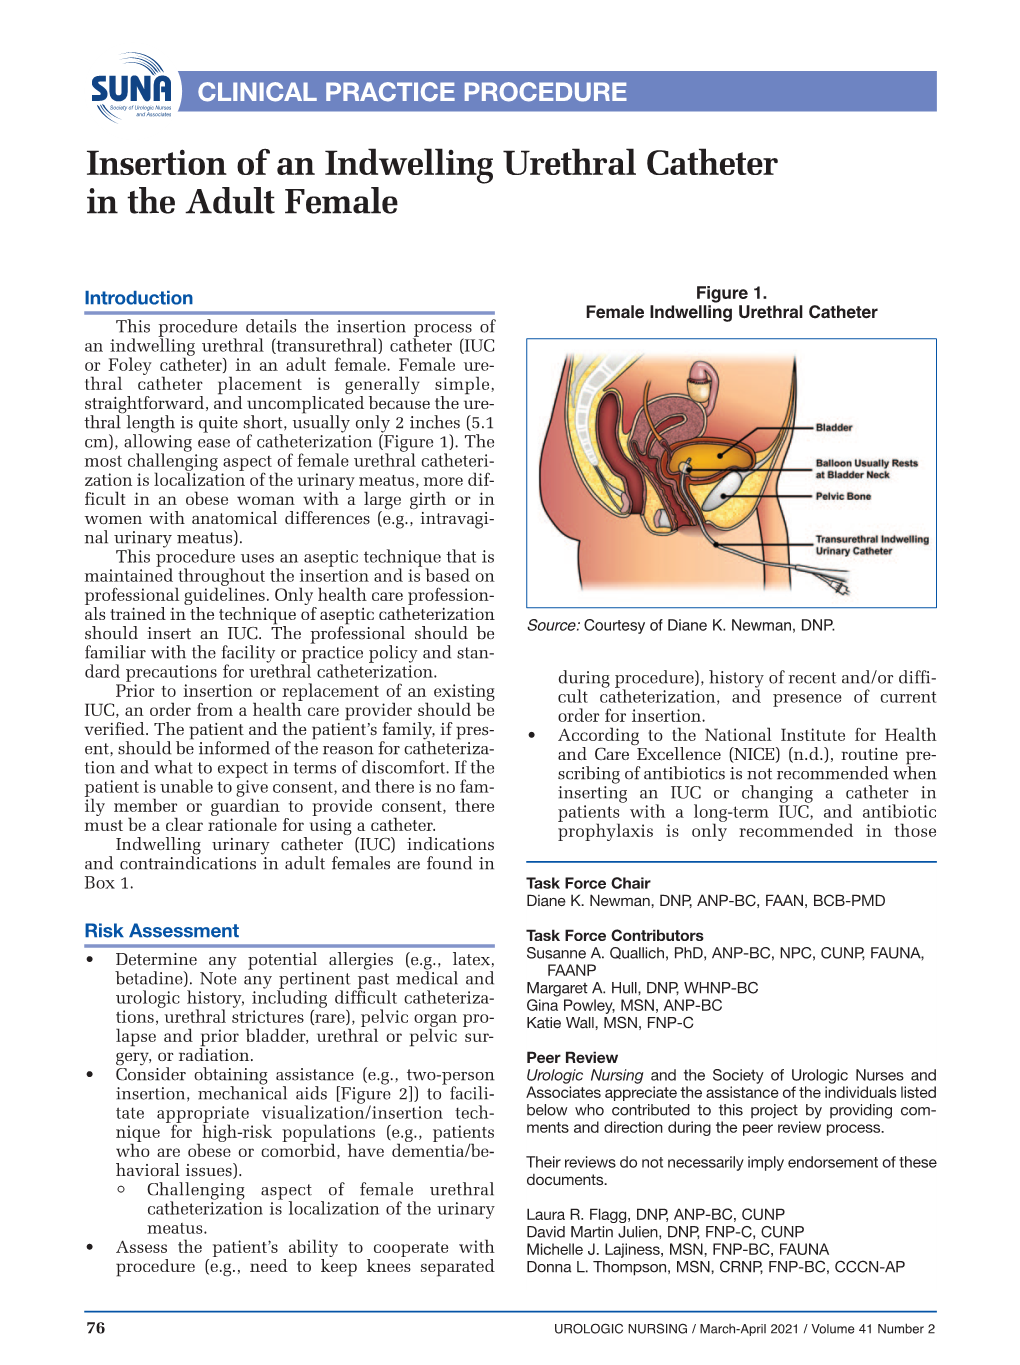 Insertion of an Indwelling Urethral Catheter in the Adult Female